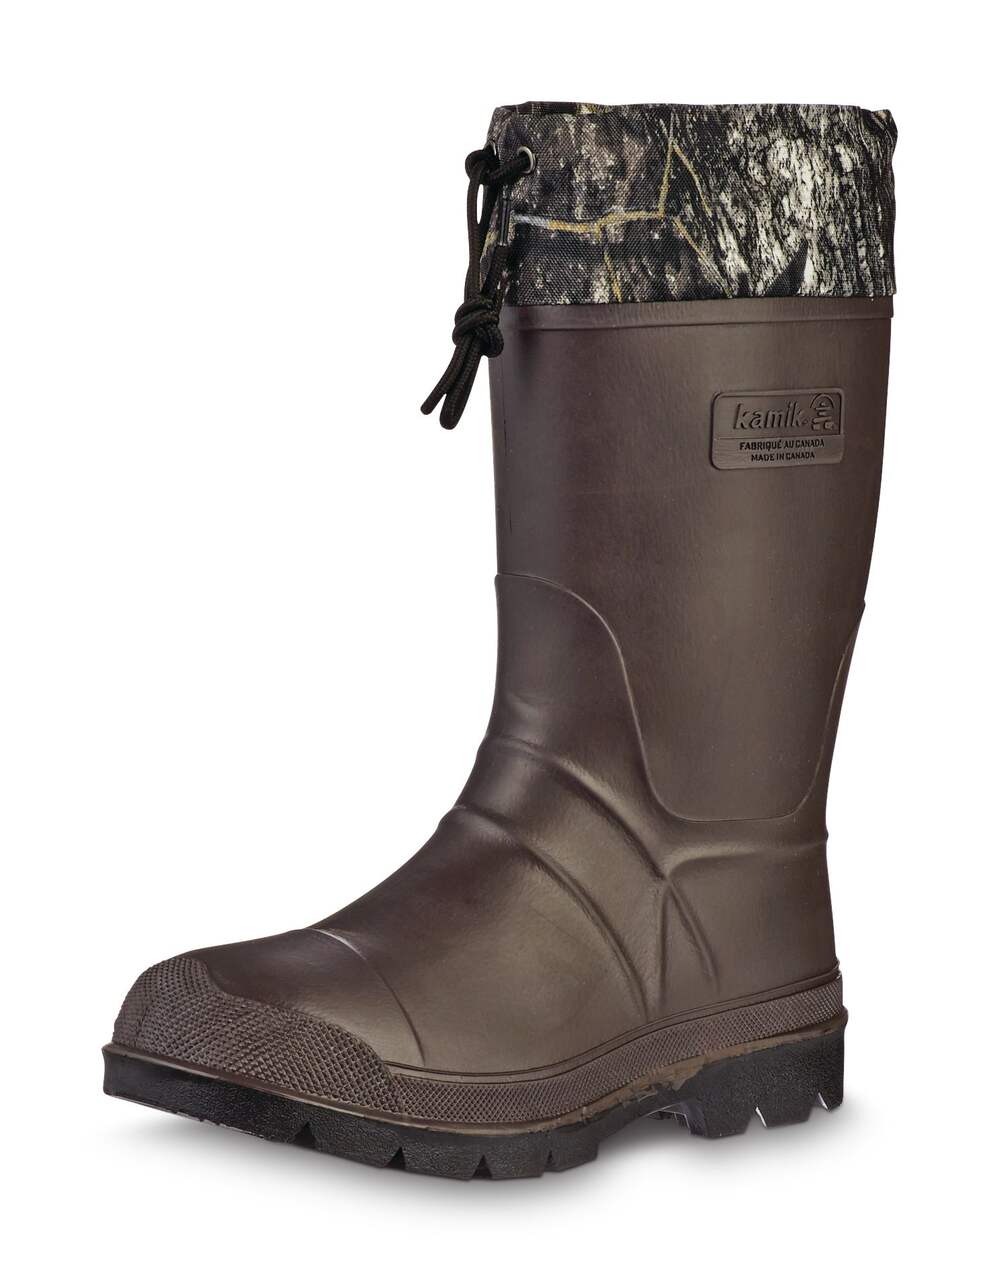 https://media-www.canadiantire.ca/product/playing/hunting/hunting-apparel-footwear/0873492/kamik-bushmaster-hunting-boot-size-8-5fe5db87-7594-4faf-9c8d-cdcc9f81f95c-jpgrendition.jpg?imdensity=1&imwidth=1244&impolicy=mZoom